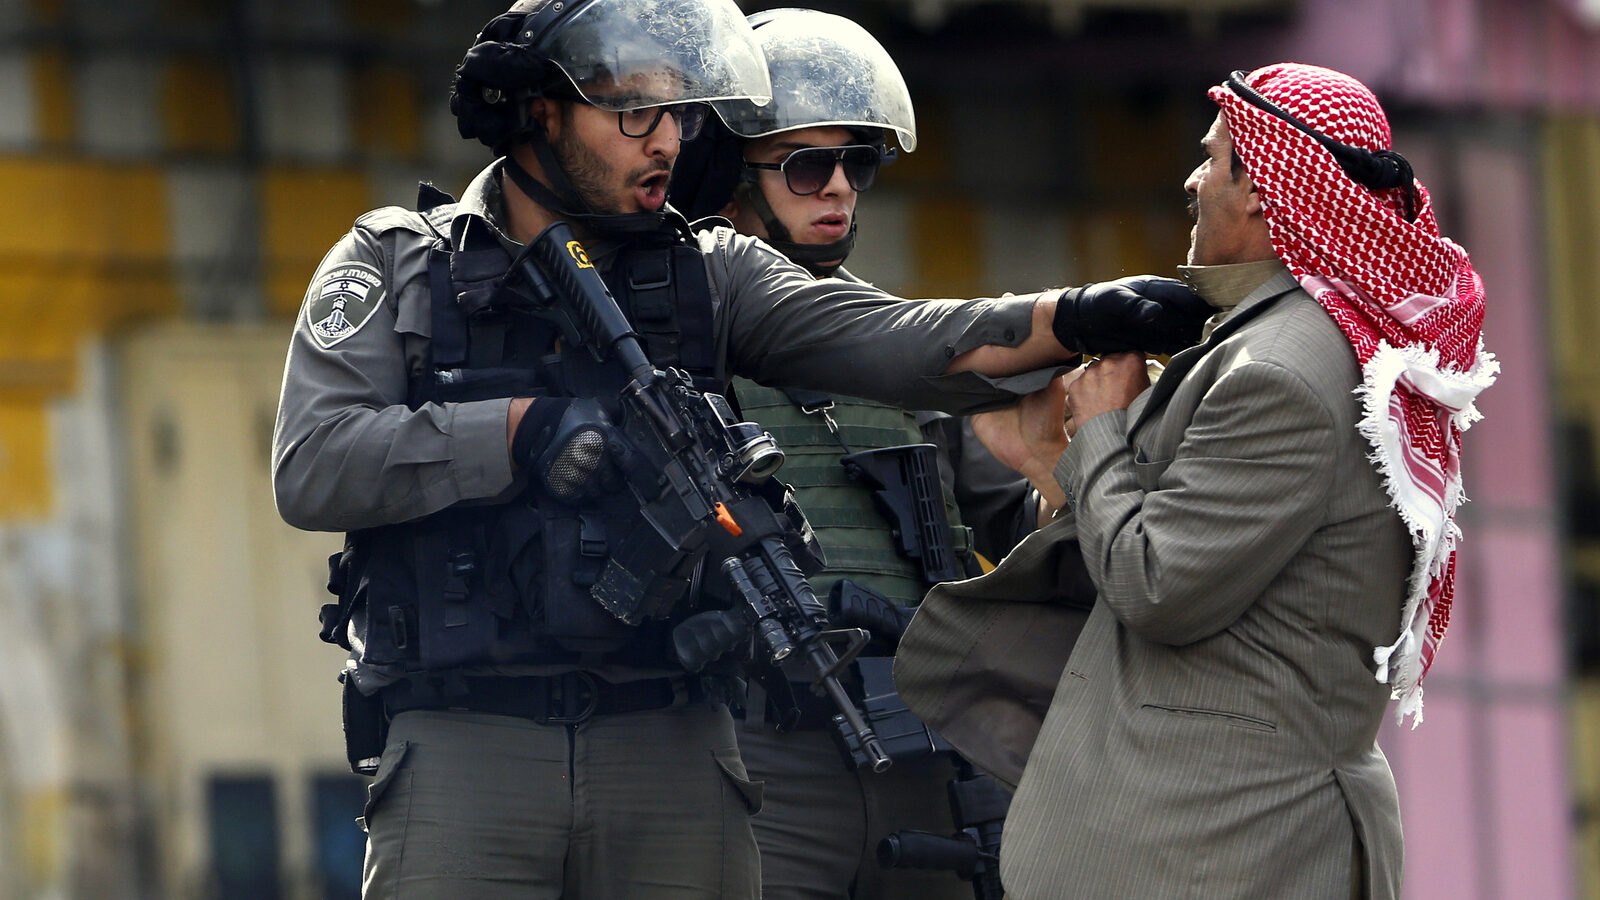 A Palestinian is pushed an Israeli policemen. Saturday, Oct. 10, 2015. (AP Photo/Nasser Shiyoukhi)